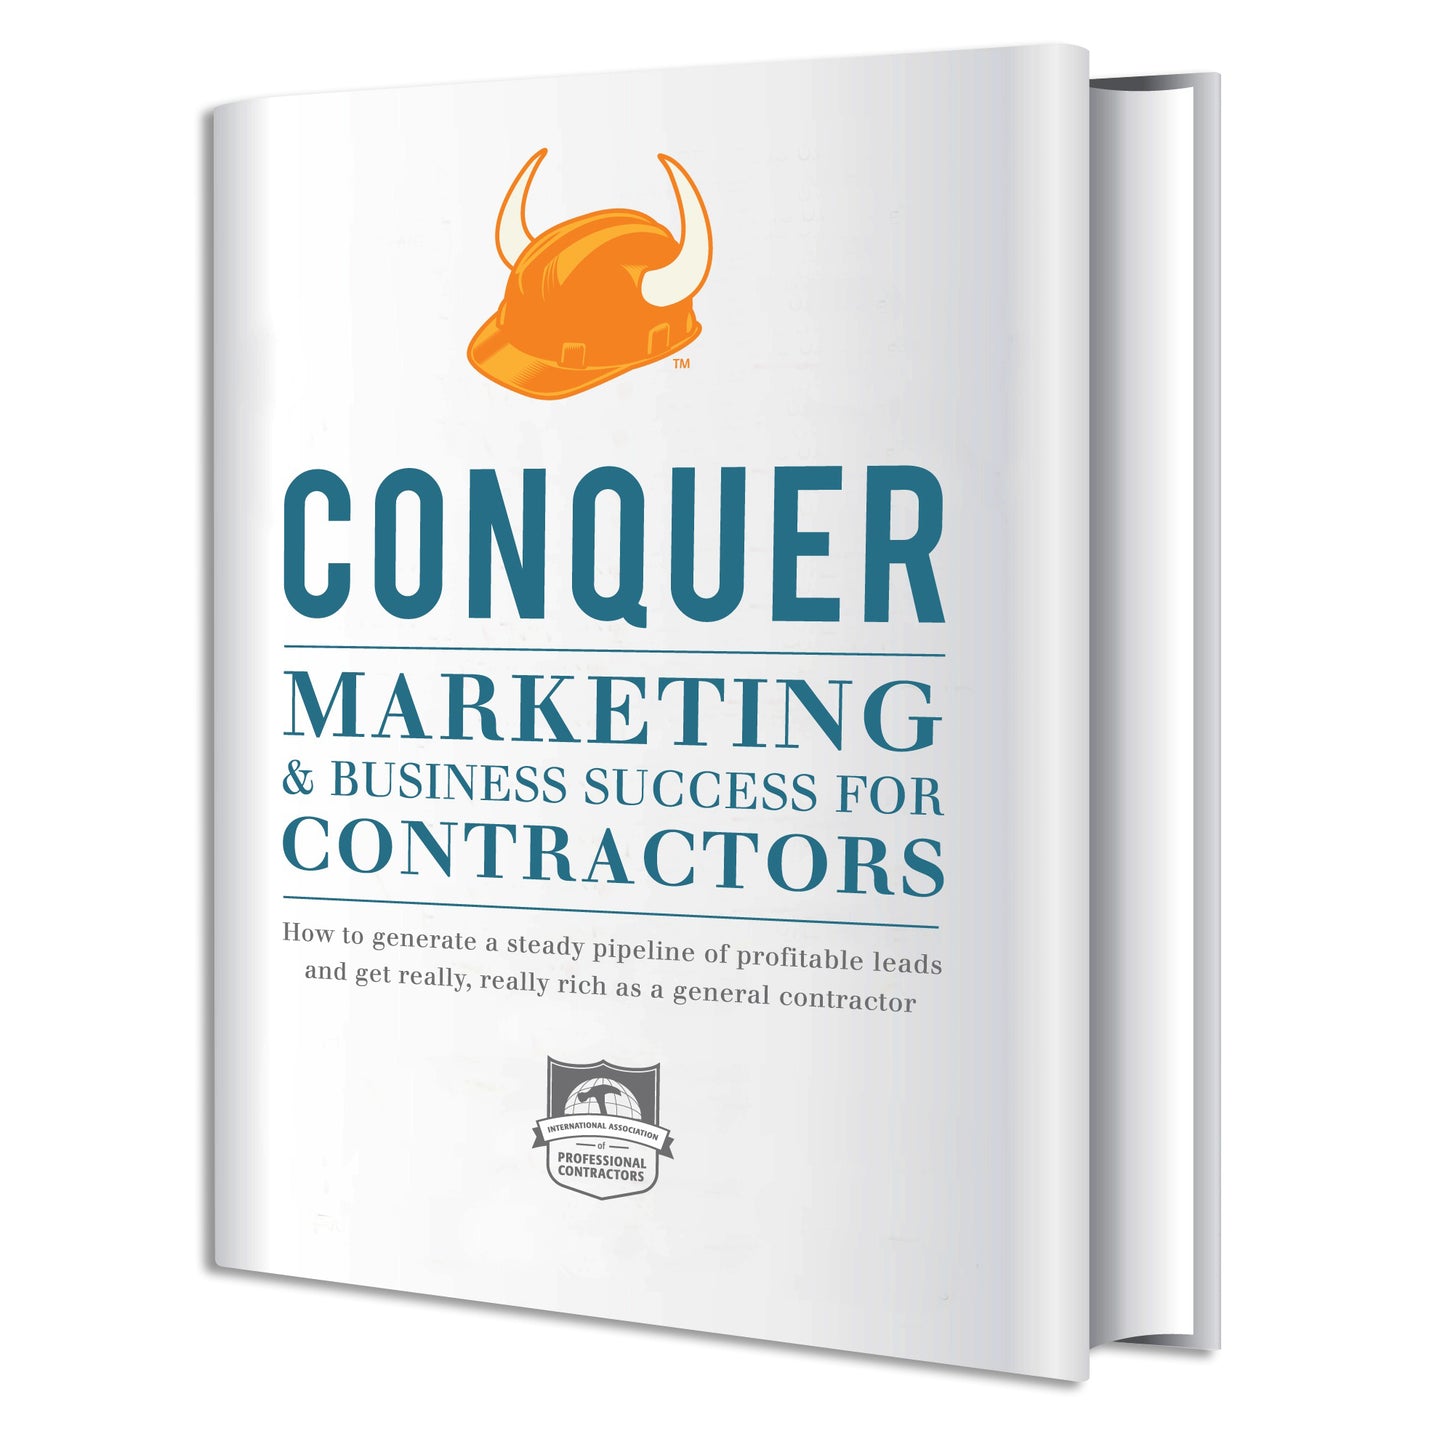 CONQUER Marketing and Business Success for Contractors PDF